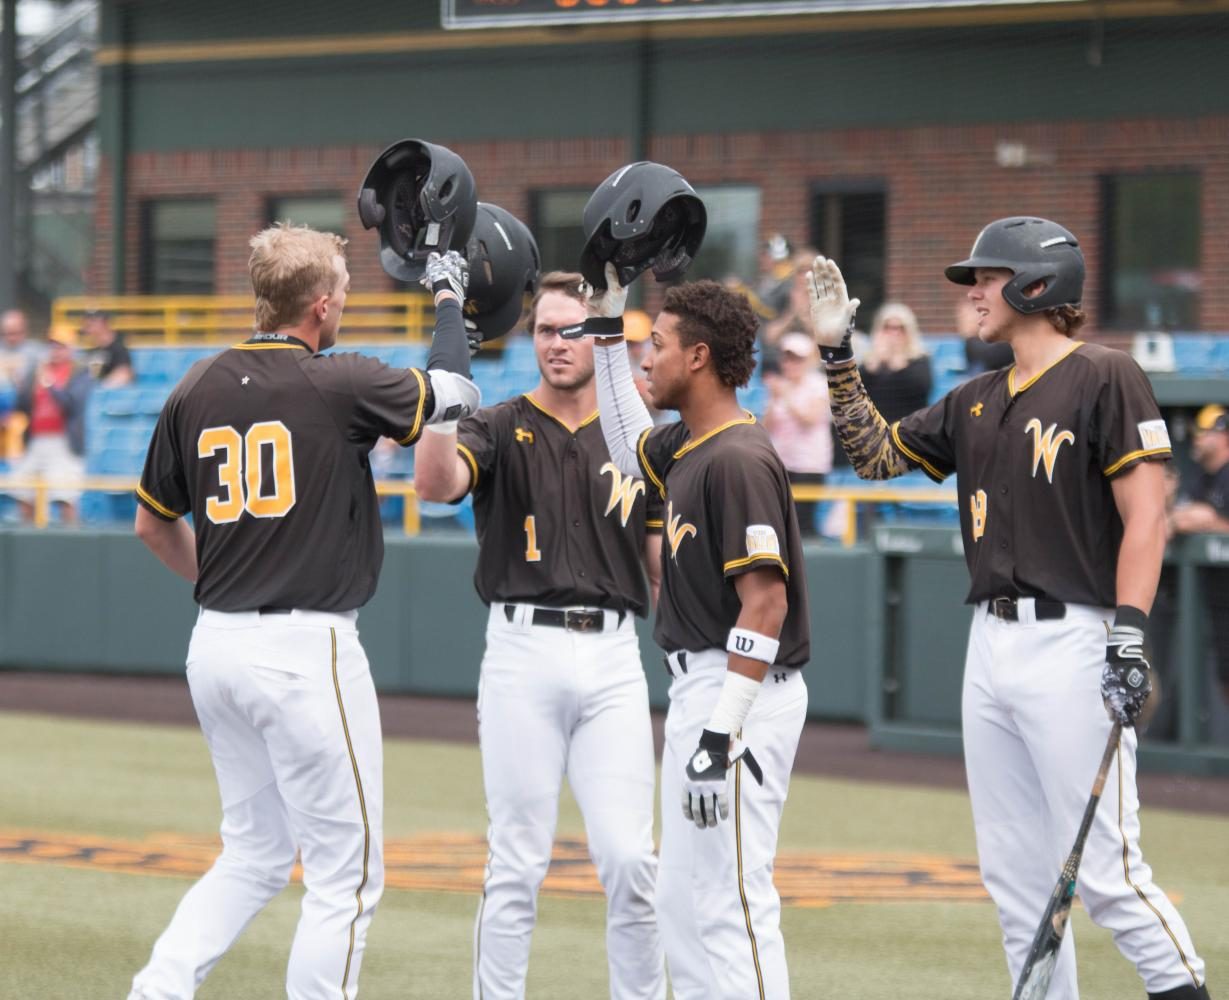 Wichita State outfielder Greyson Jenista is met by teammates Travis Young, Alex Jackson, and Alec Bohm at home plate after hitting a home run during the first game against Illinois State at Eck Stadium (April 28, 2017)